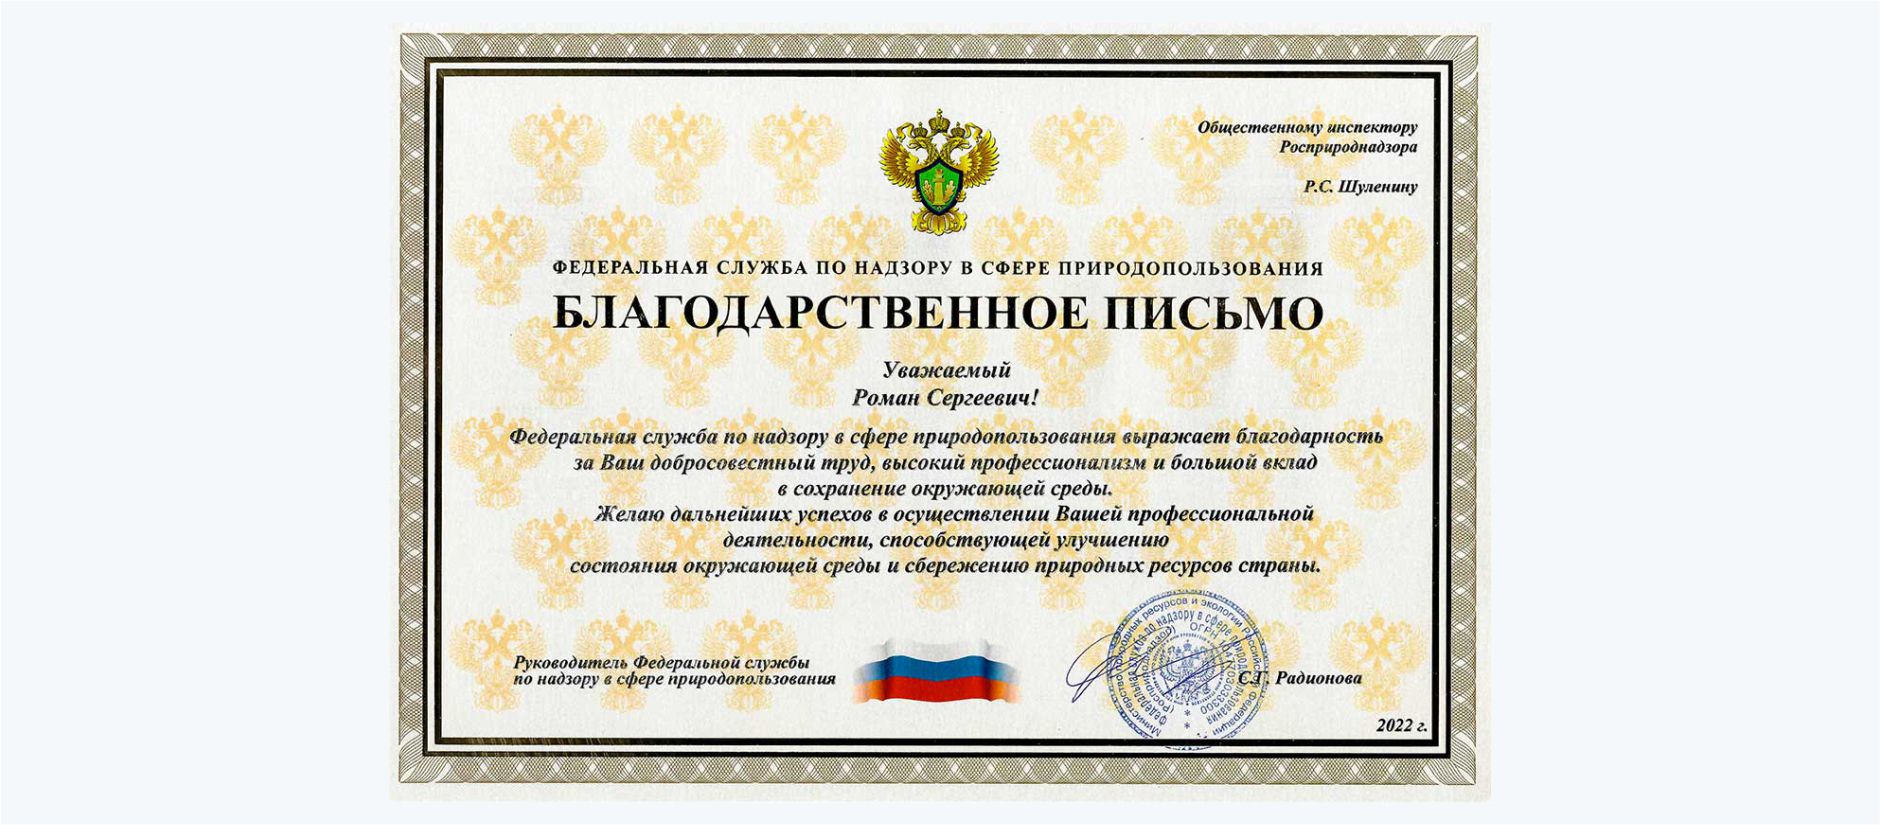 Roman Shulenin, Head of NNIAT Perm subdivision, was awarded a letter of appreciation from Federal Service for Supervision of Natural Resources